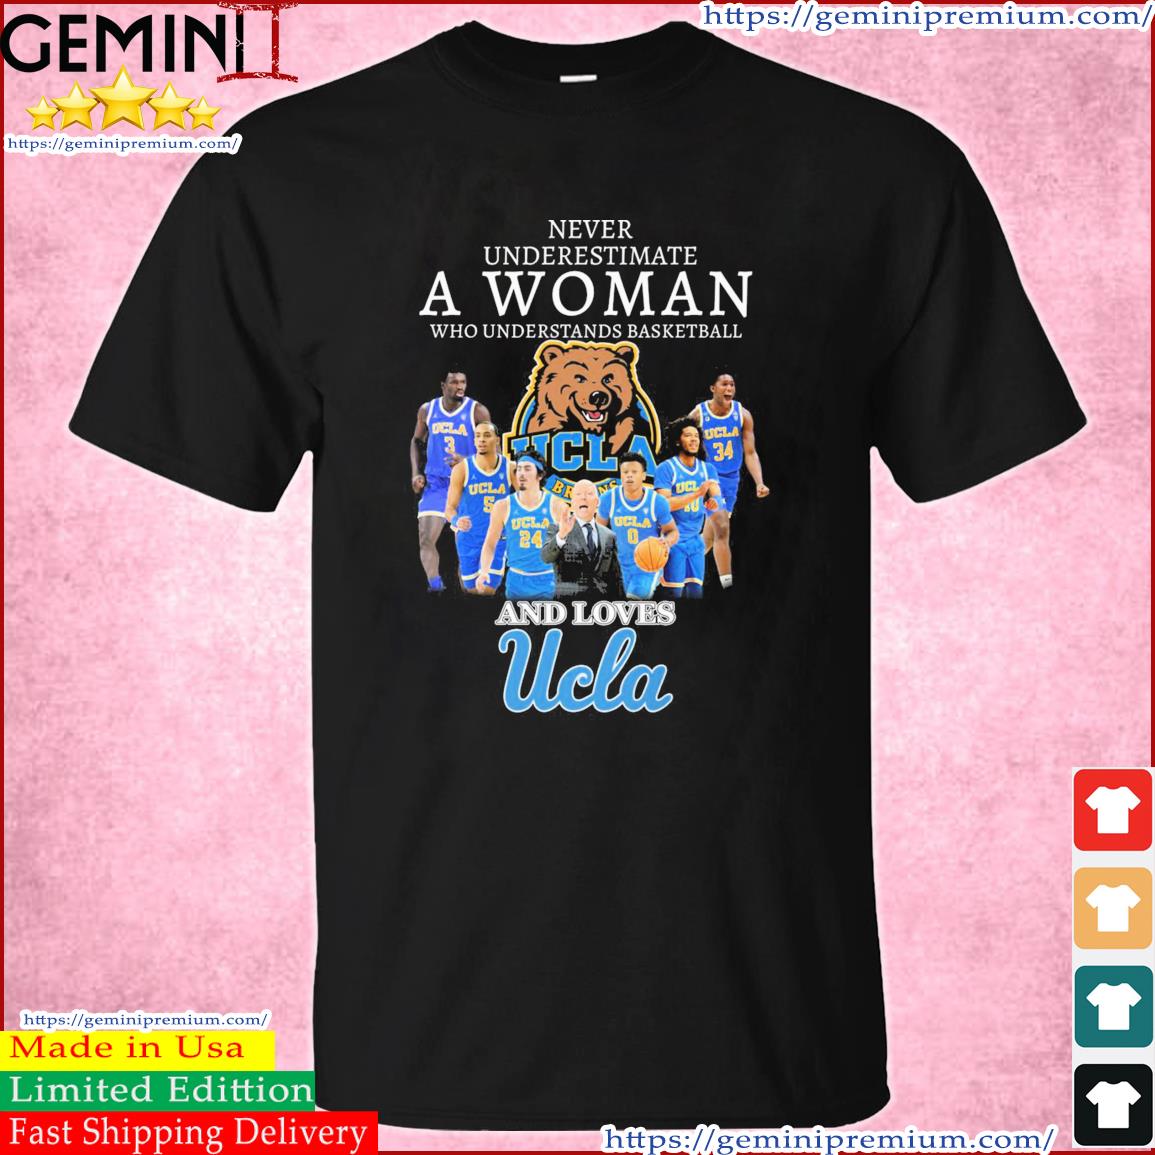 Never Underestimate A Woman Who Understands Basketball And Loves UCLA Bruins Team Shirt